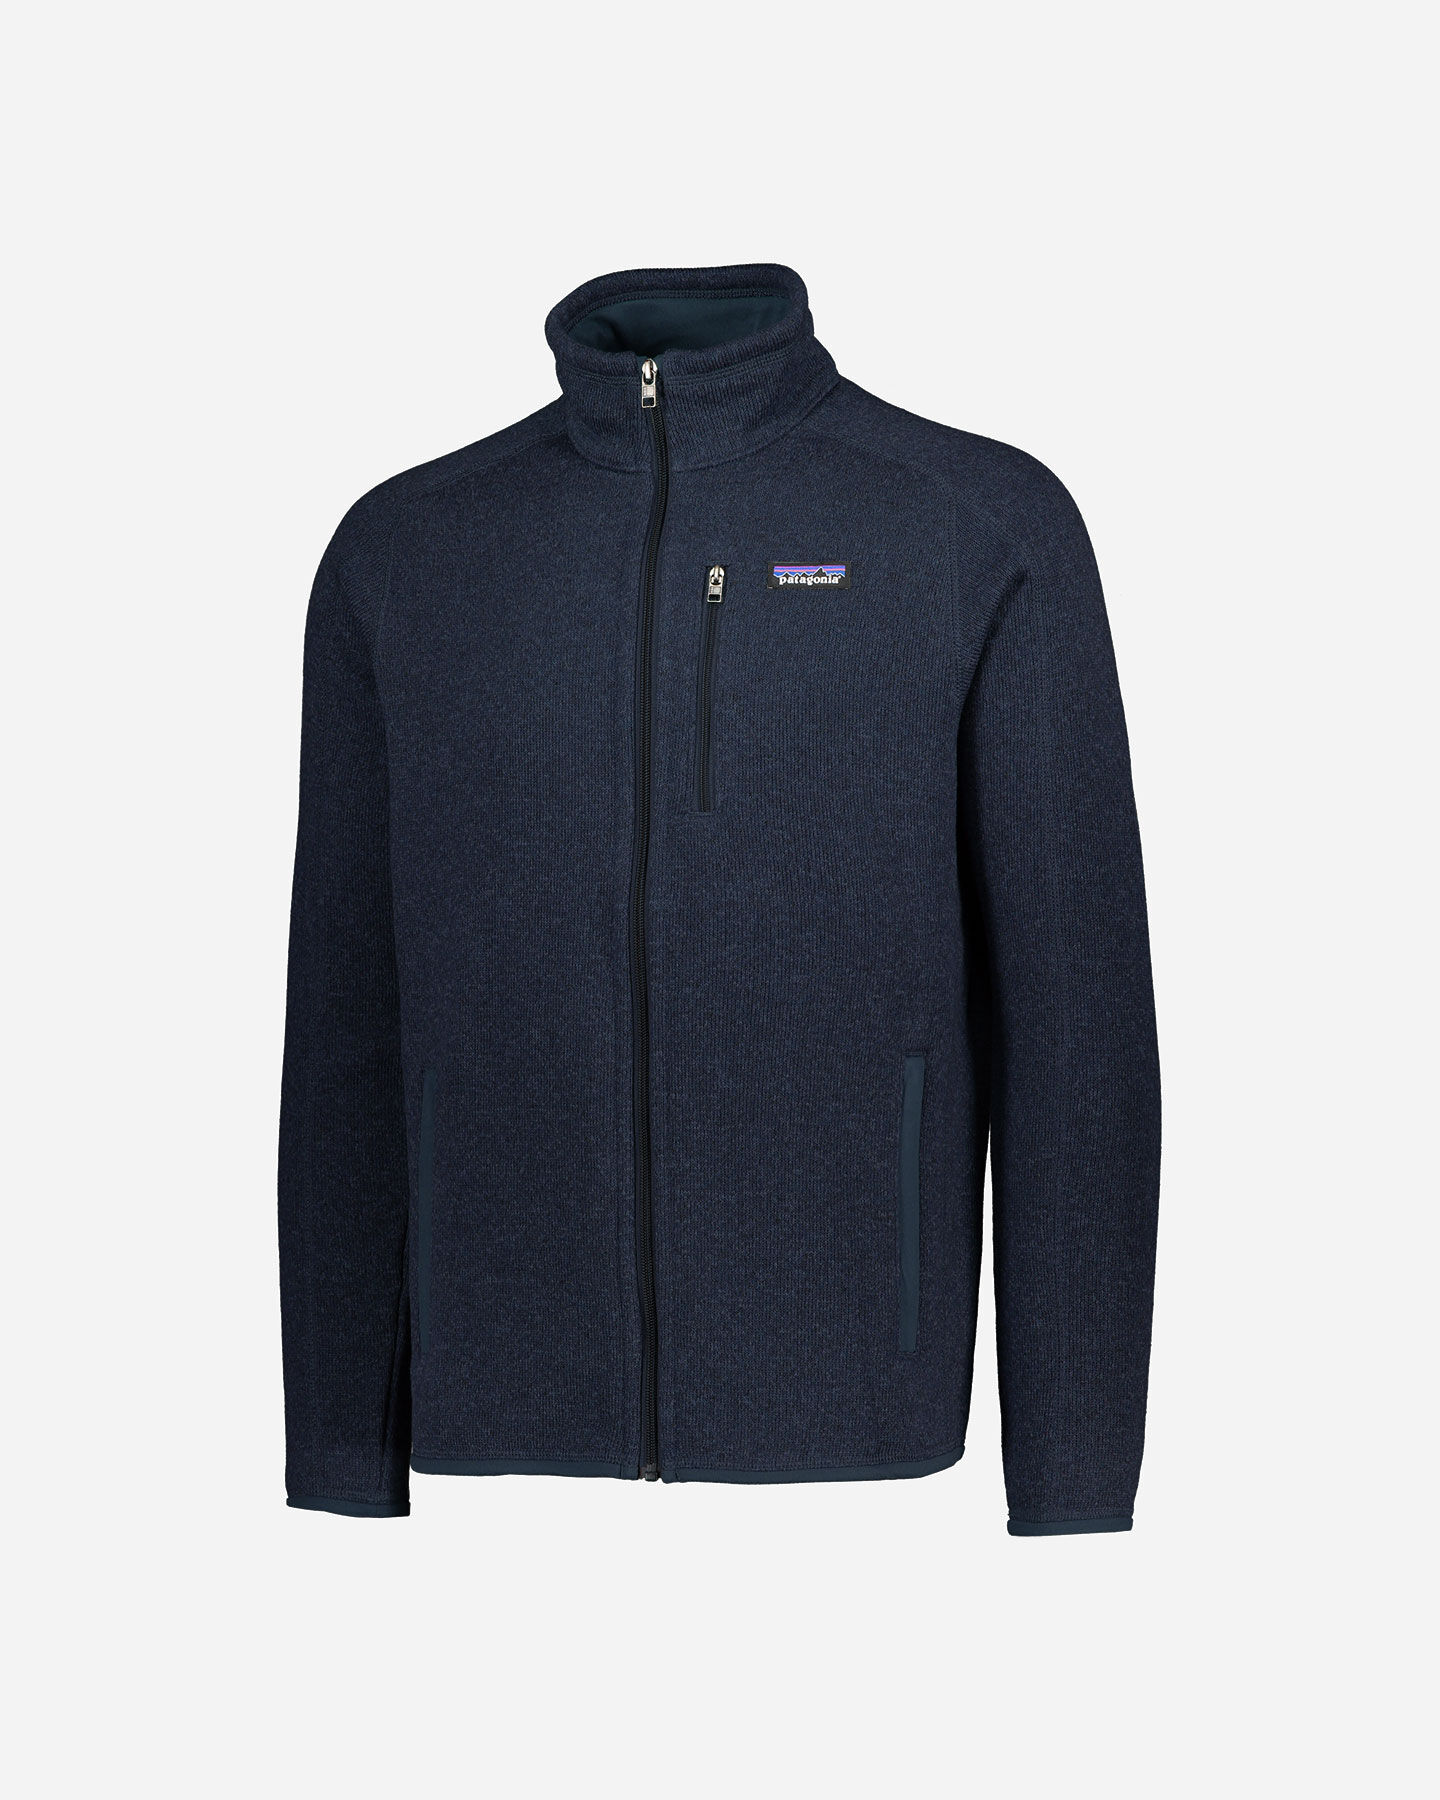  Pile PATAGONIA BETTER SWEATER M S4071094|1|S scatto 5